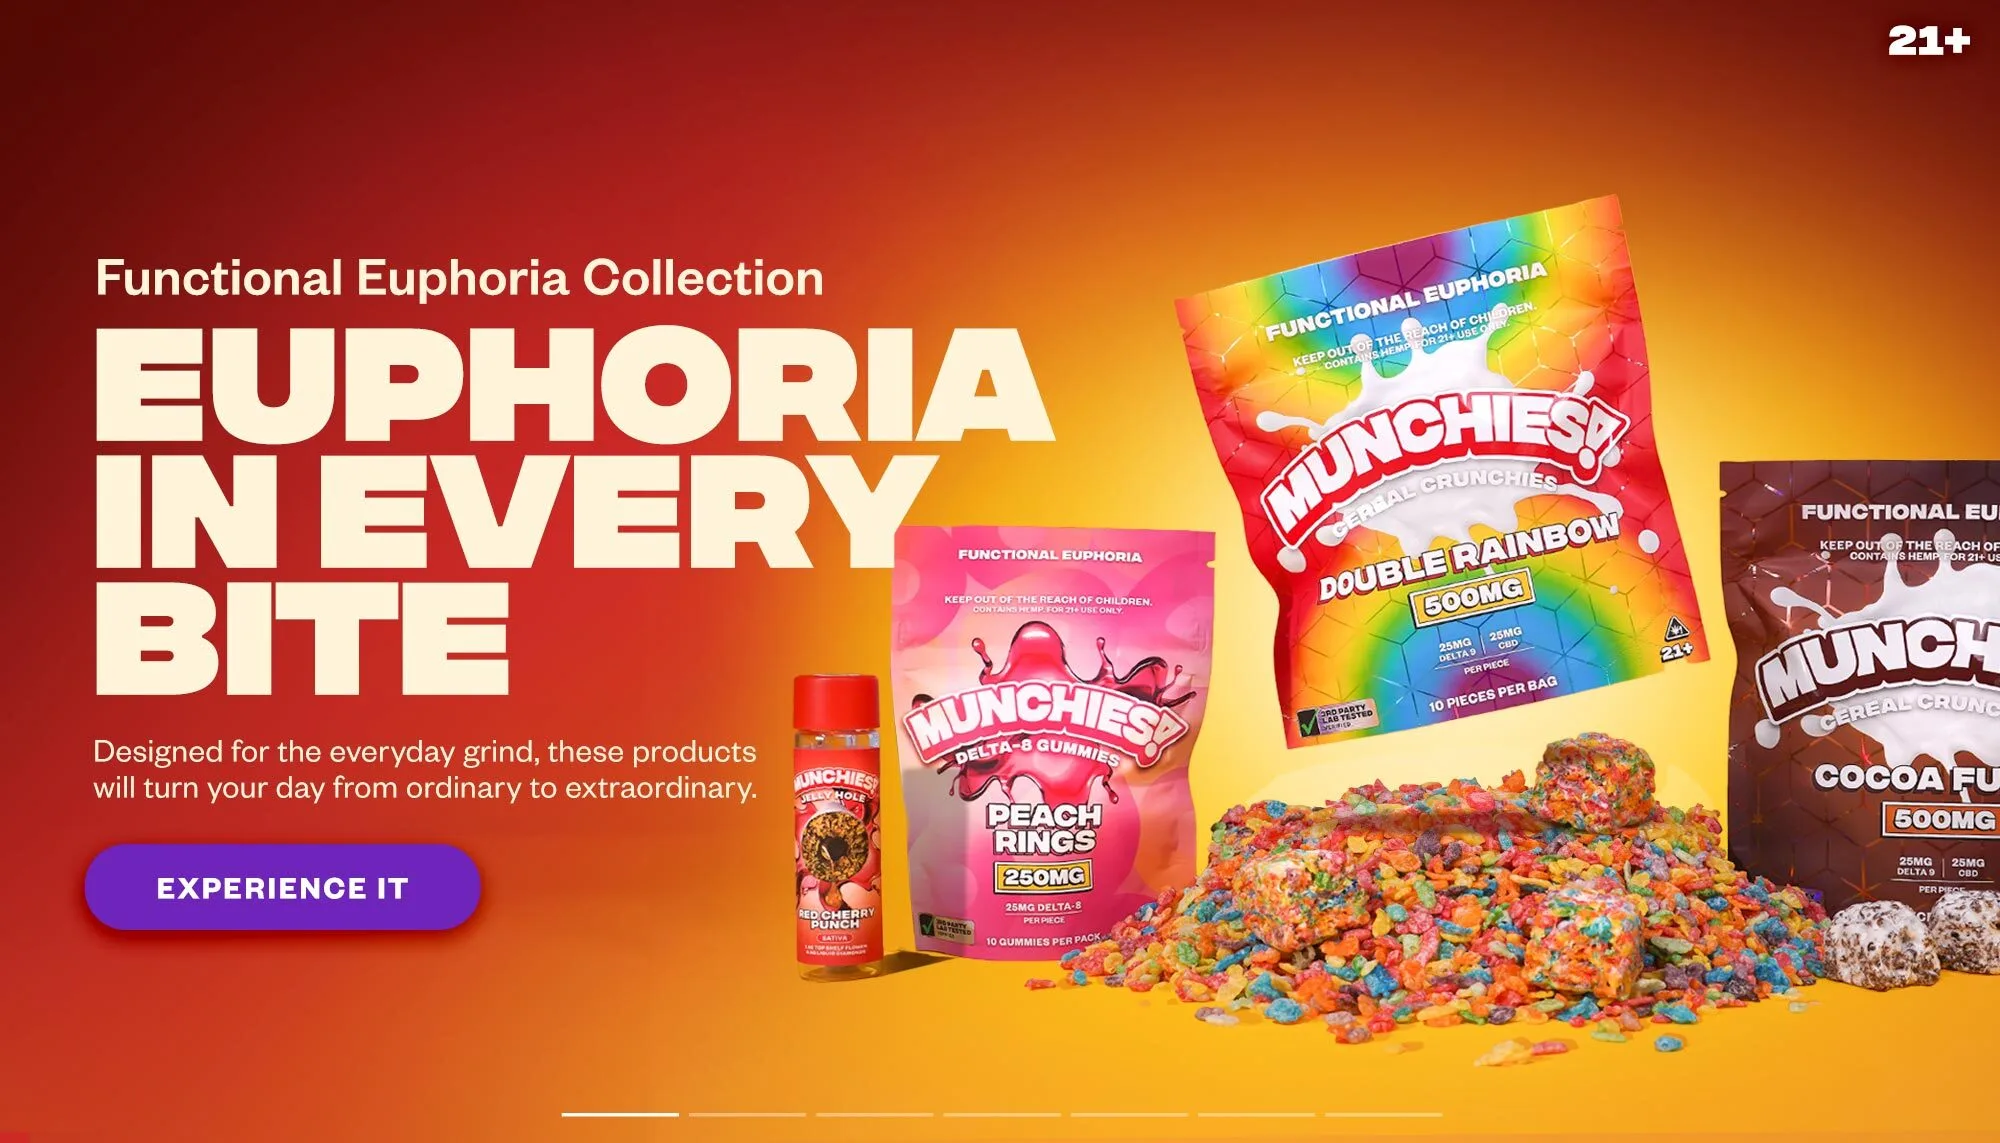 Functional Euphoria Collection. Euphoria in every bite. Designed for the everyday grind, these products will turn your day from ordinary to extraordinary. CTA: Experience it